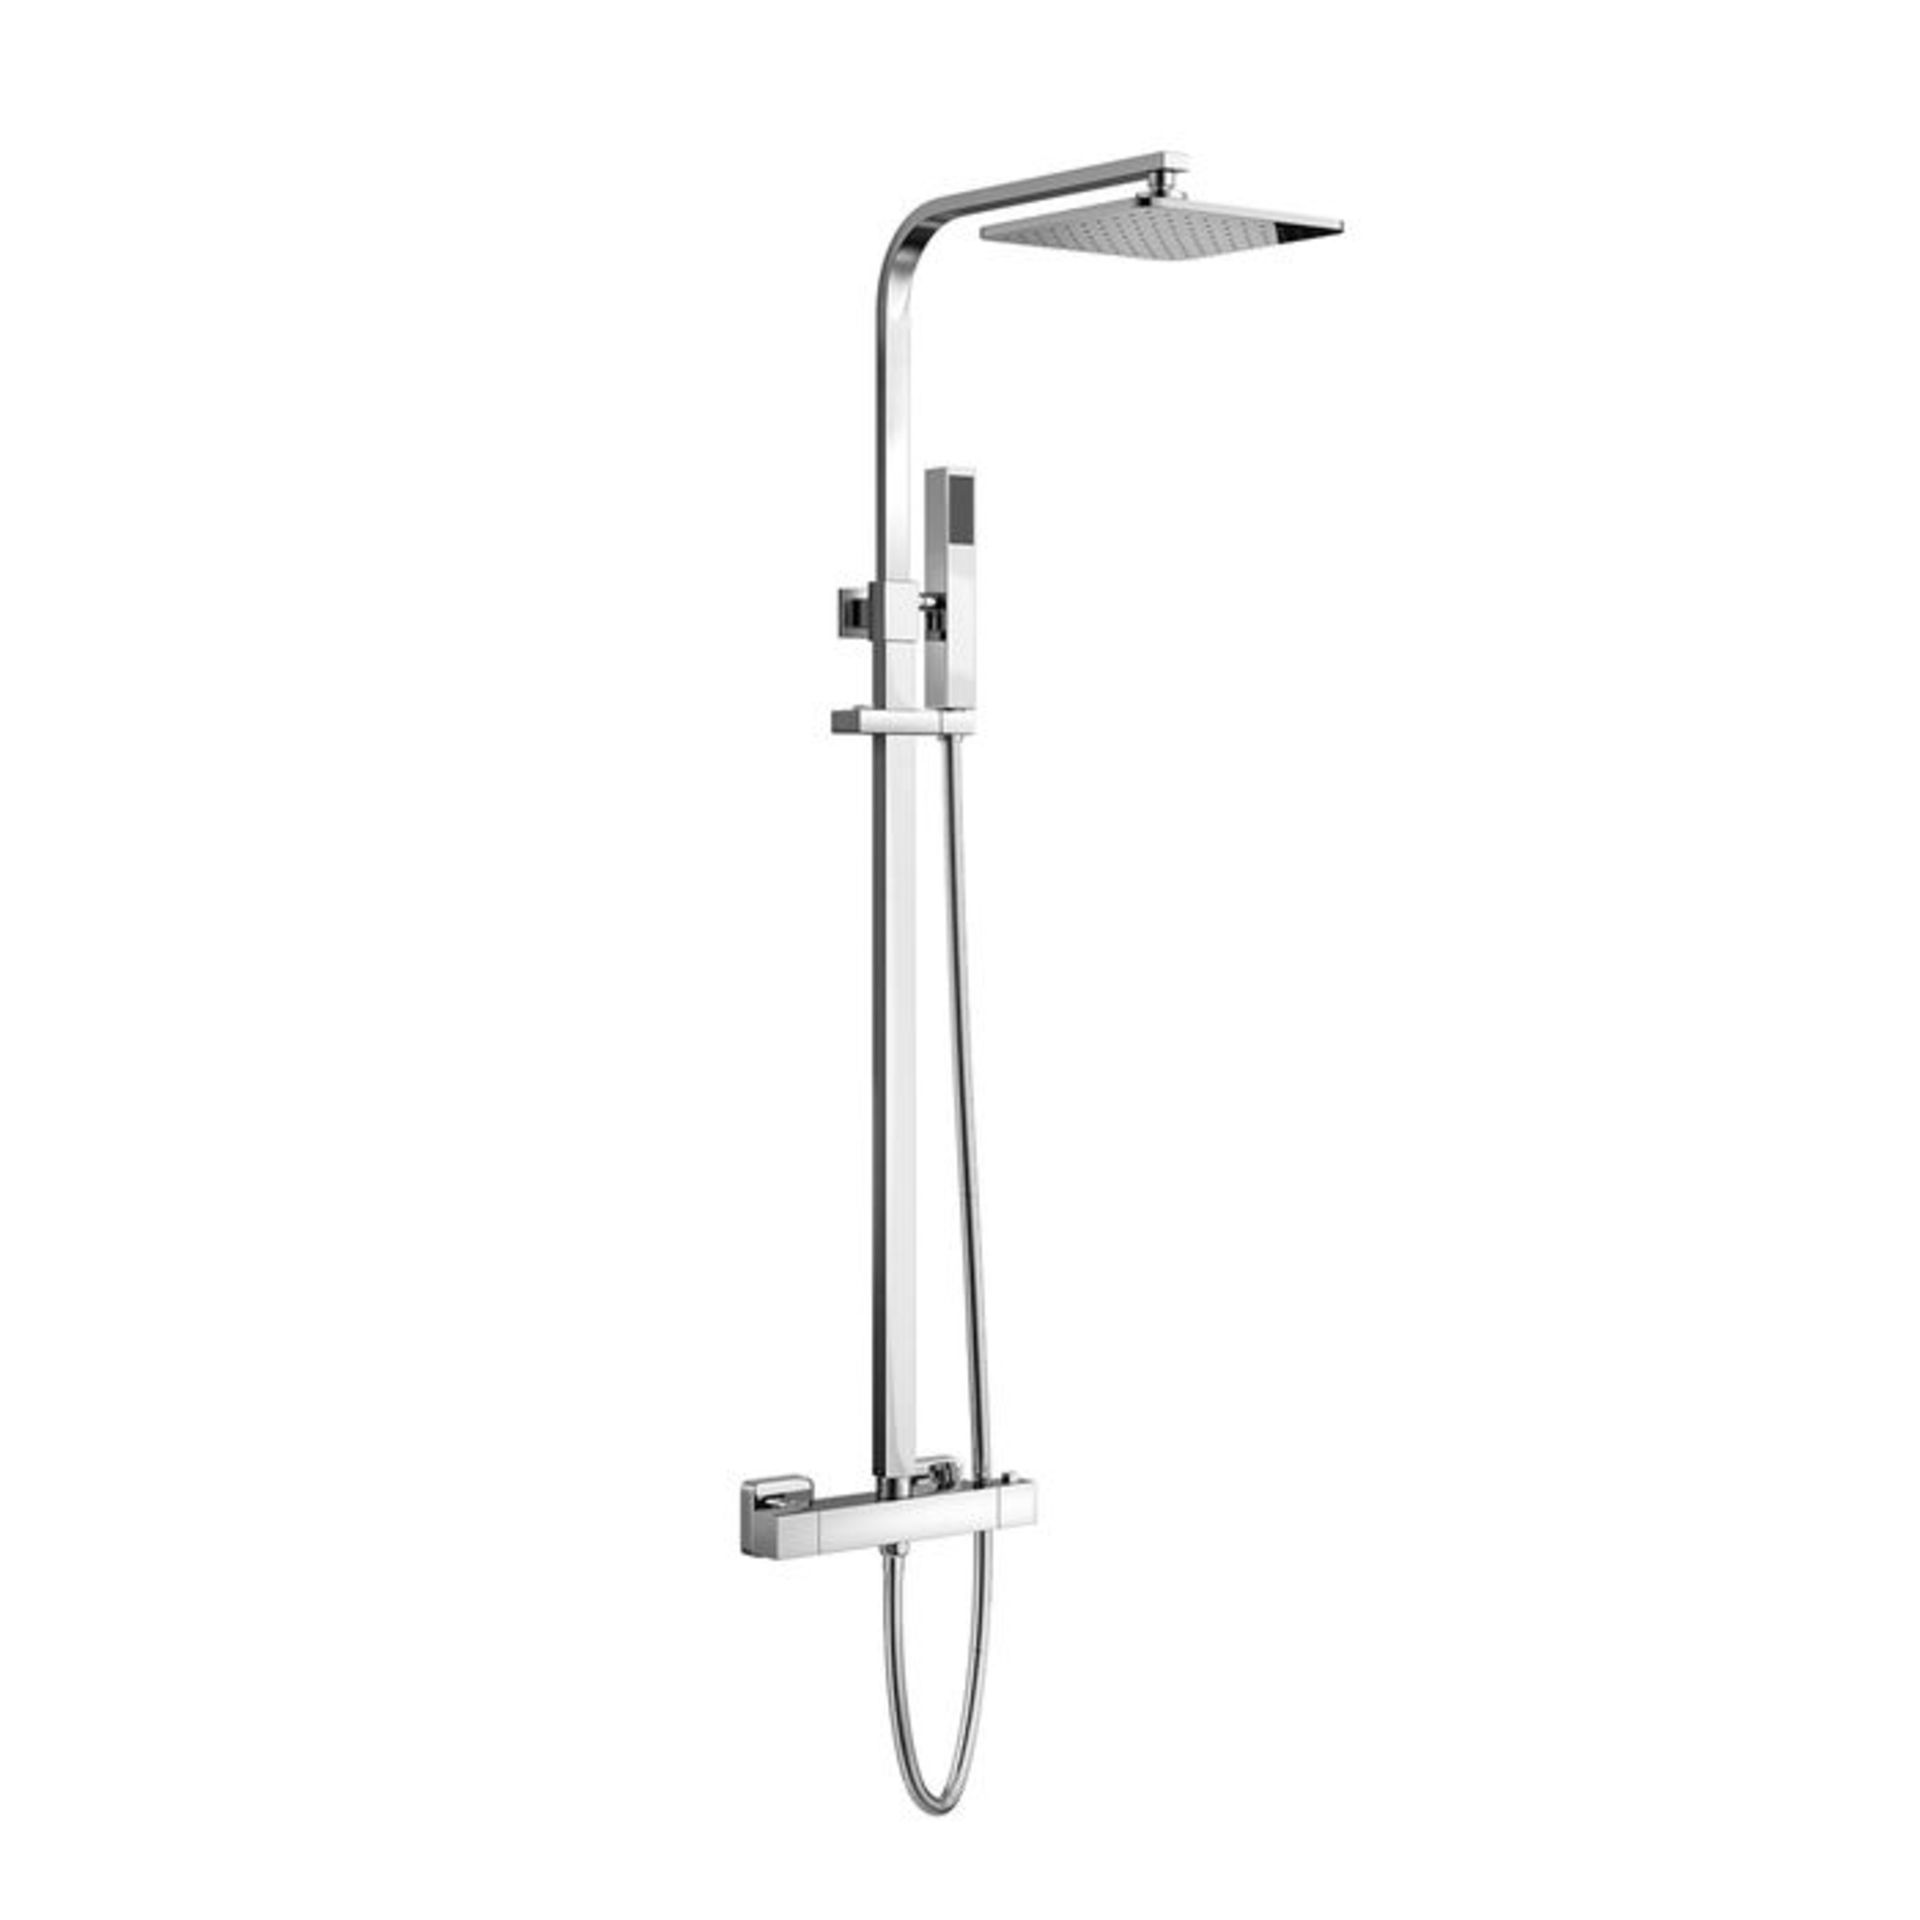 (JM198) Square Exposed Thermostatic Shower Kit & Medium Head- Harper. Angled, slim and on-trend - Image 2 of 3